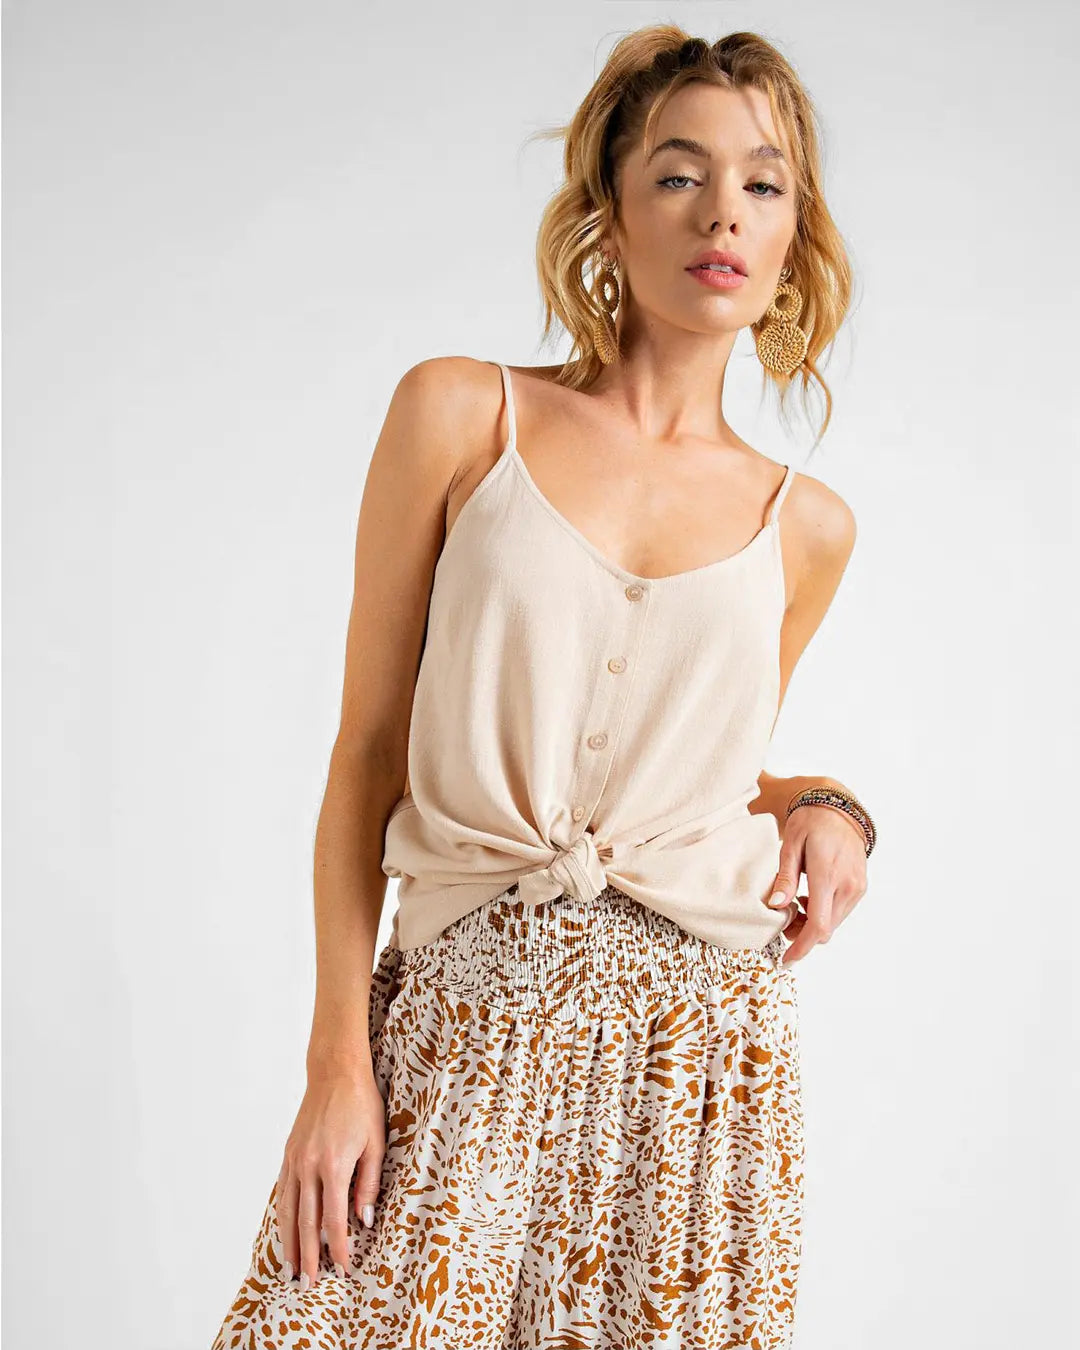 The perfect top to throw on and go! Super lightweight in the prettiest light hues, this tank top features functional buttons down the front with a scooped neckline and spaghetti straps.